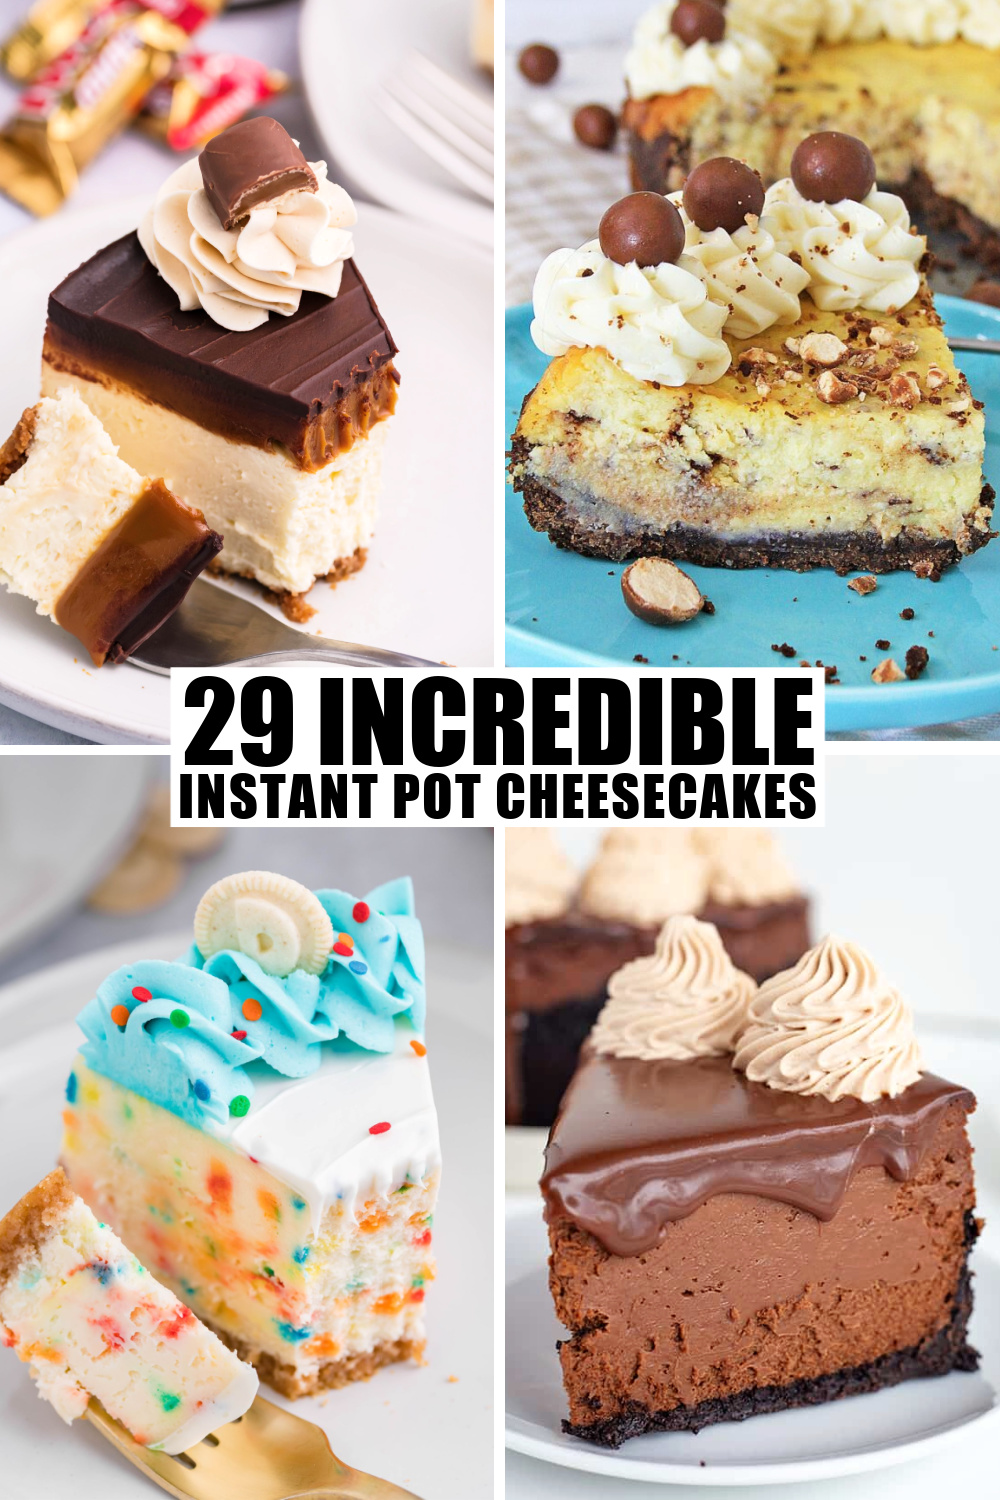 Just when you thought your Instant Pot couldn’t get any more amazing, we’ve got 29 delicious cheesecake recipes for you to try!